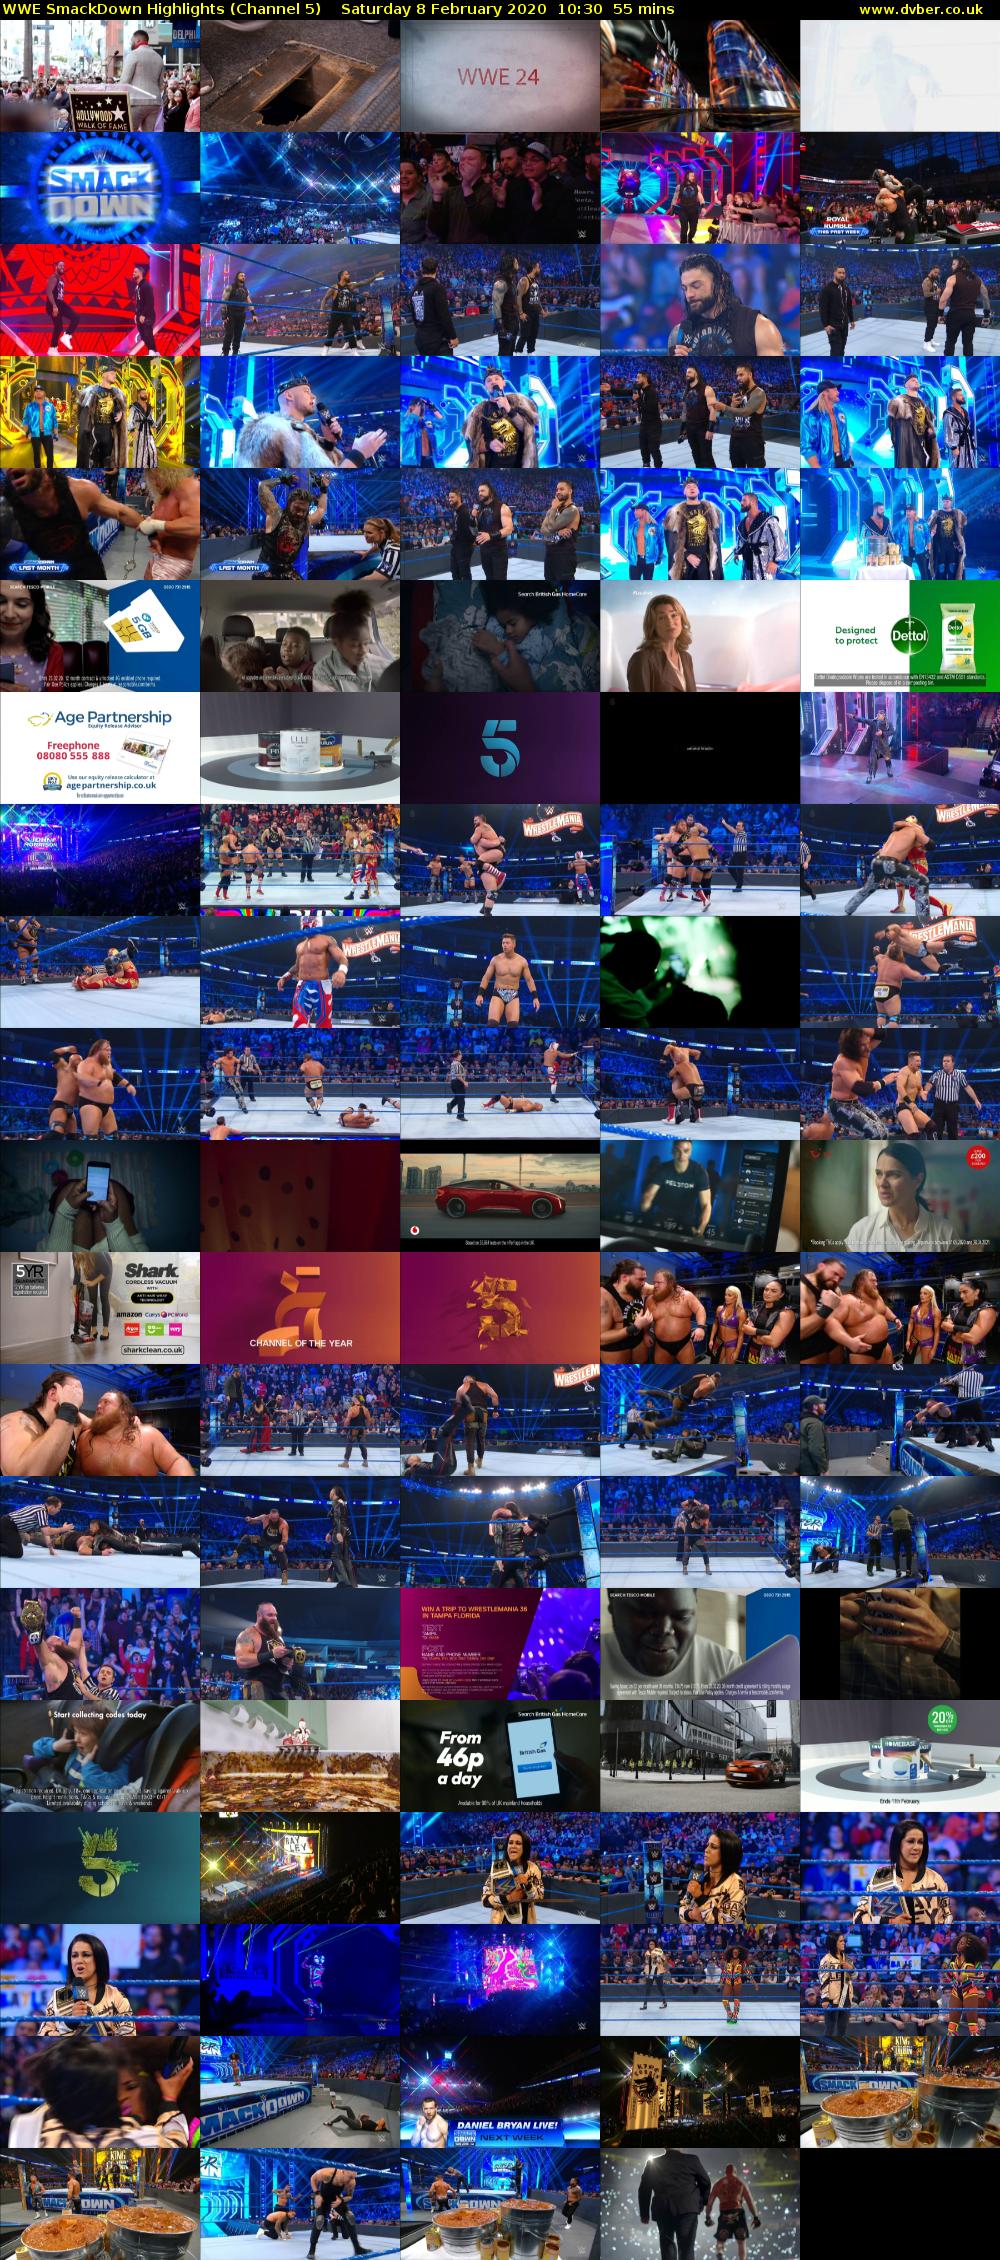 WWE SmackDown Highlights (Channel 5) Saturday 8 February 2020 10:30 - 11:25